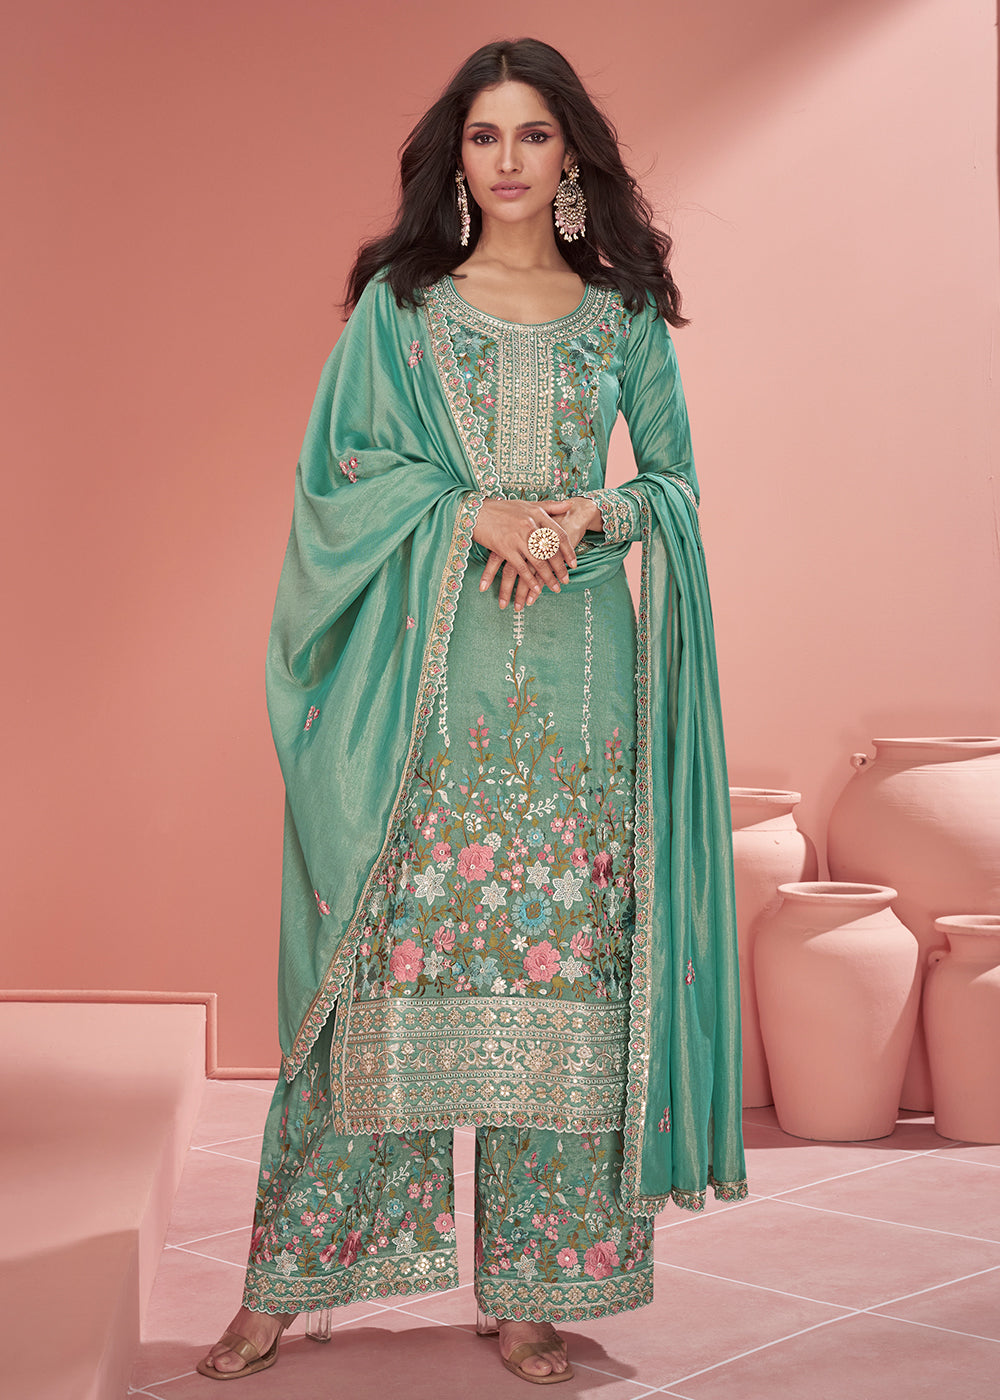 Buy Now Teal Green Organza Simar Silk Embroidered Palazzo Style Suit Online in USA, UK, Canada, Germany, Australia & Worldwide at Empress Clothing. 